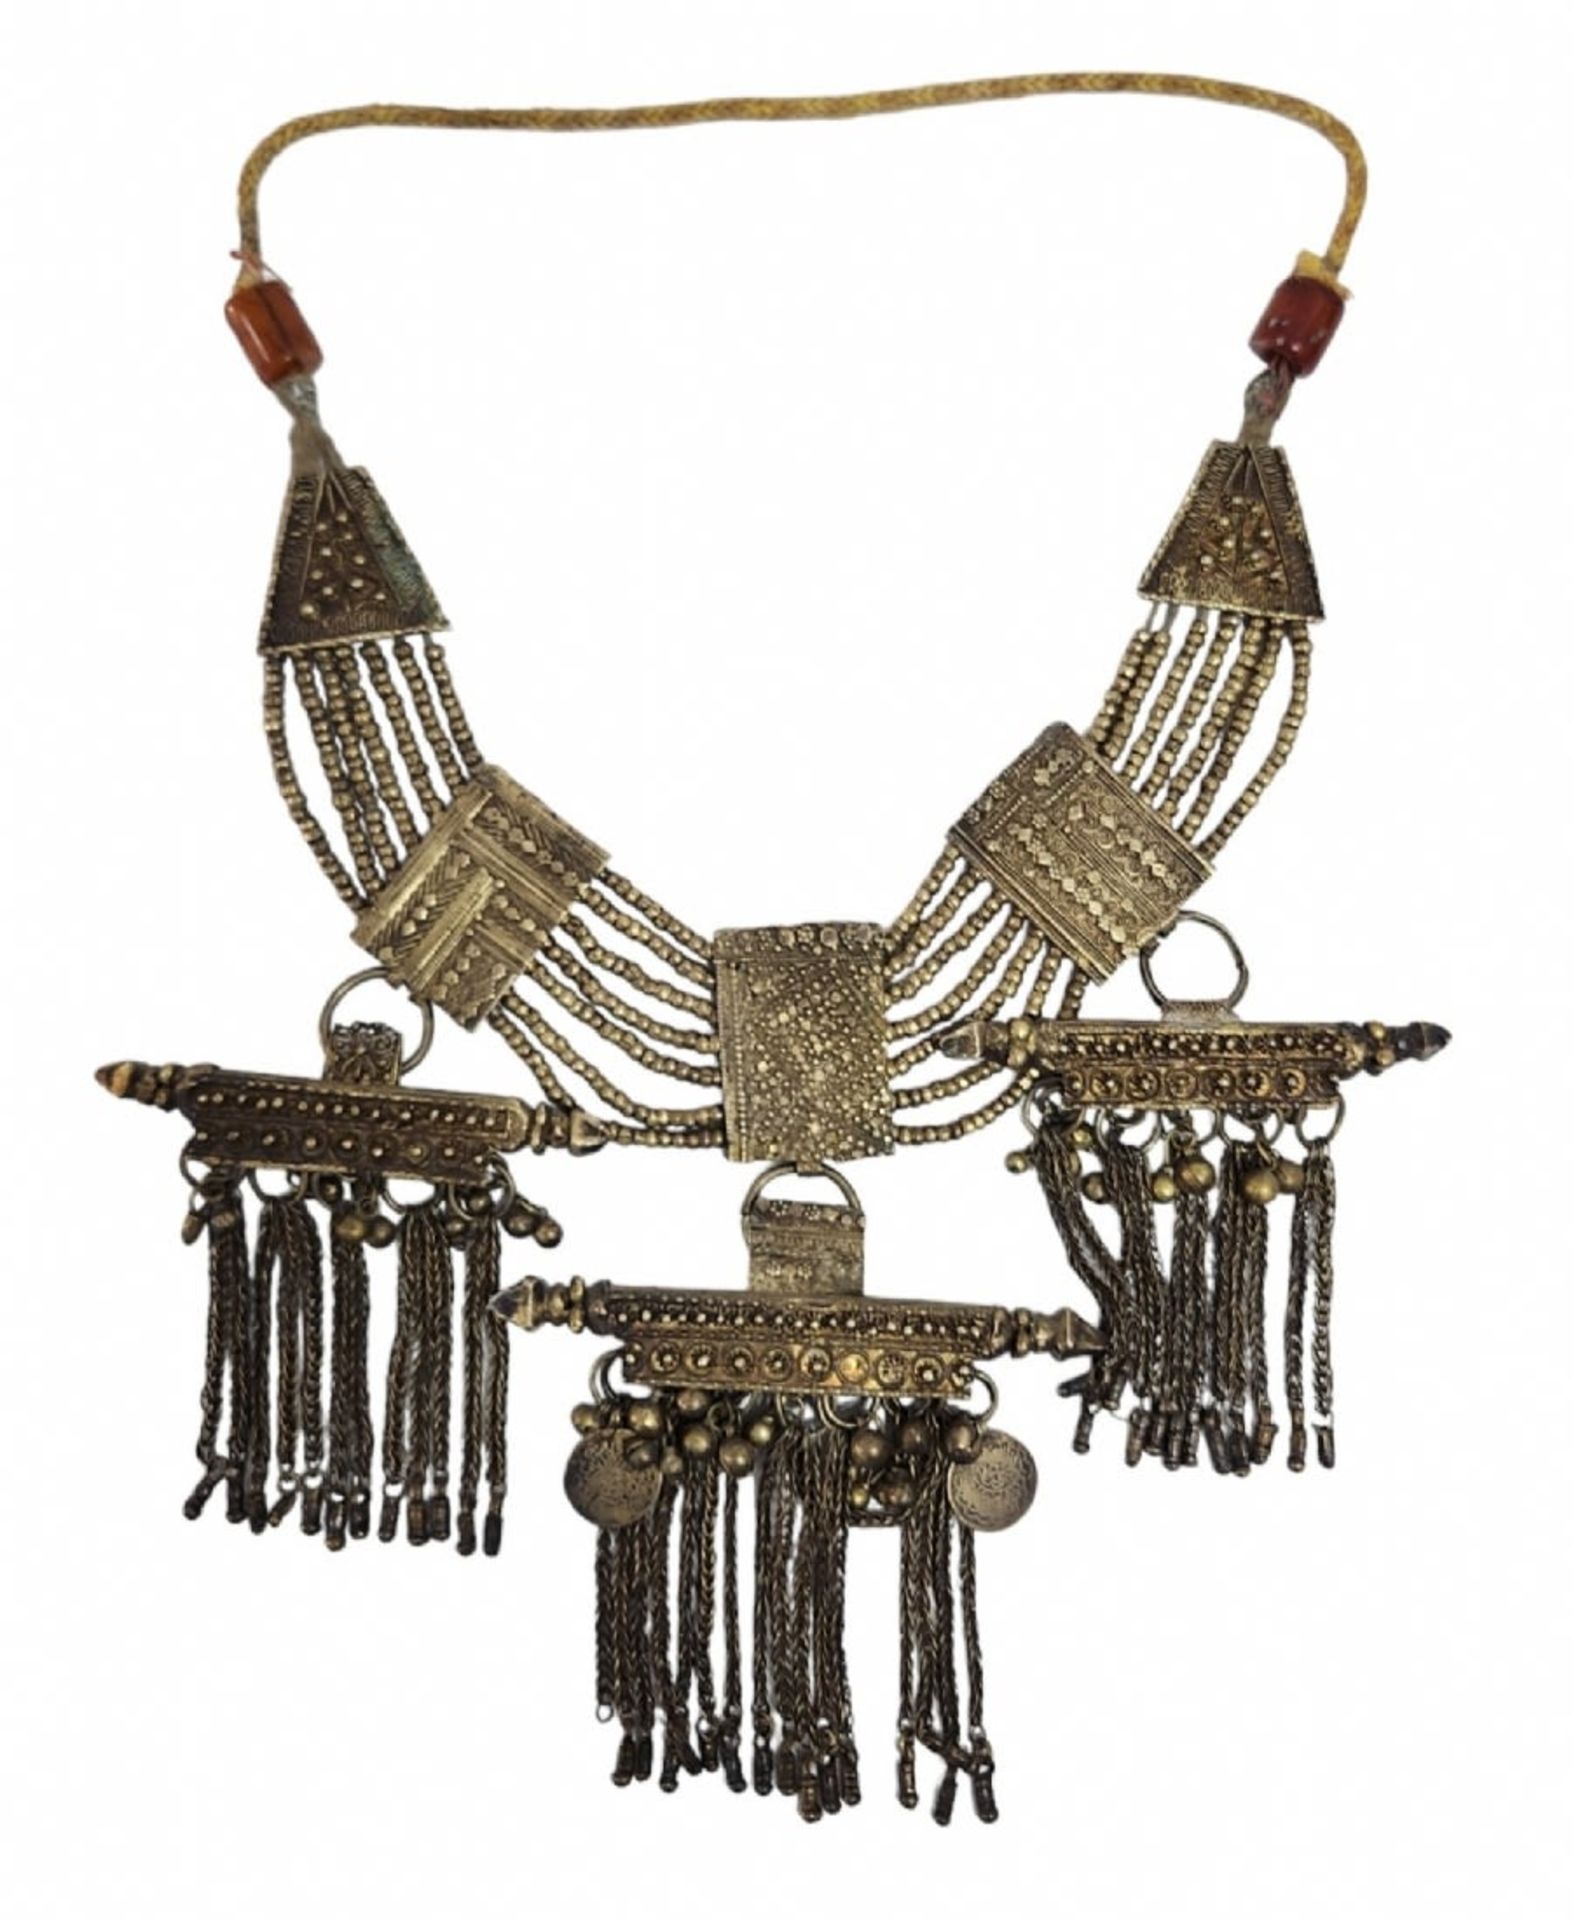 Antique Yemeni necklace, a large and very impressive necklace for a bride, from the 19th century, - Image 2 of 4